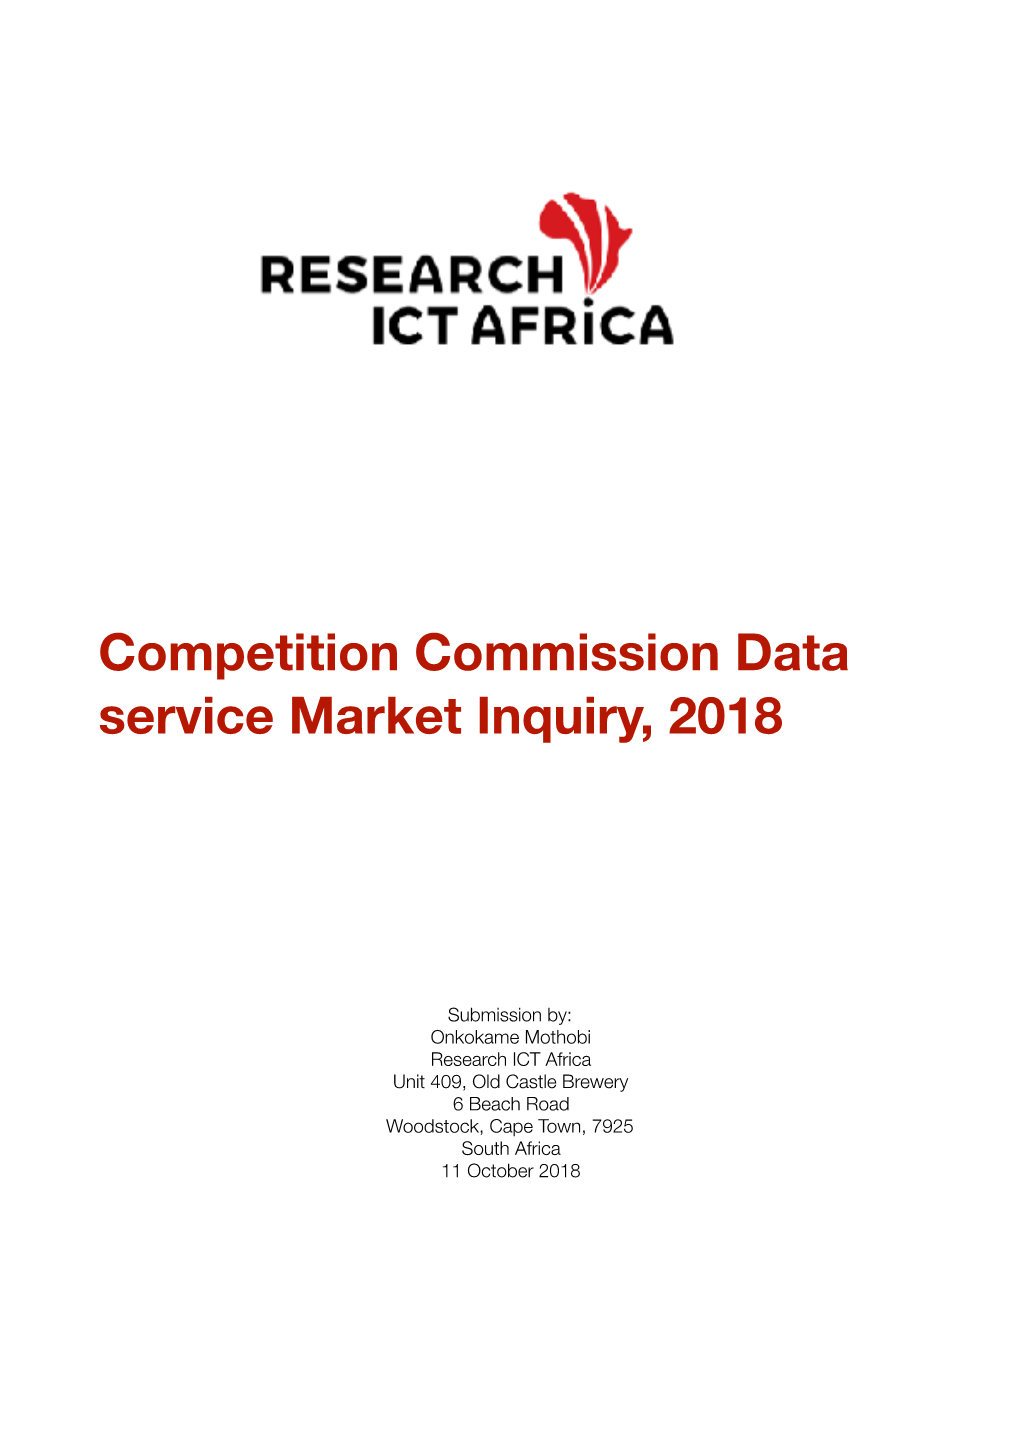 Competition Commission Data Service Market Inquiry, 2018